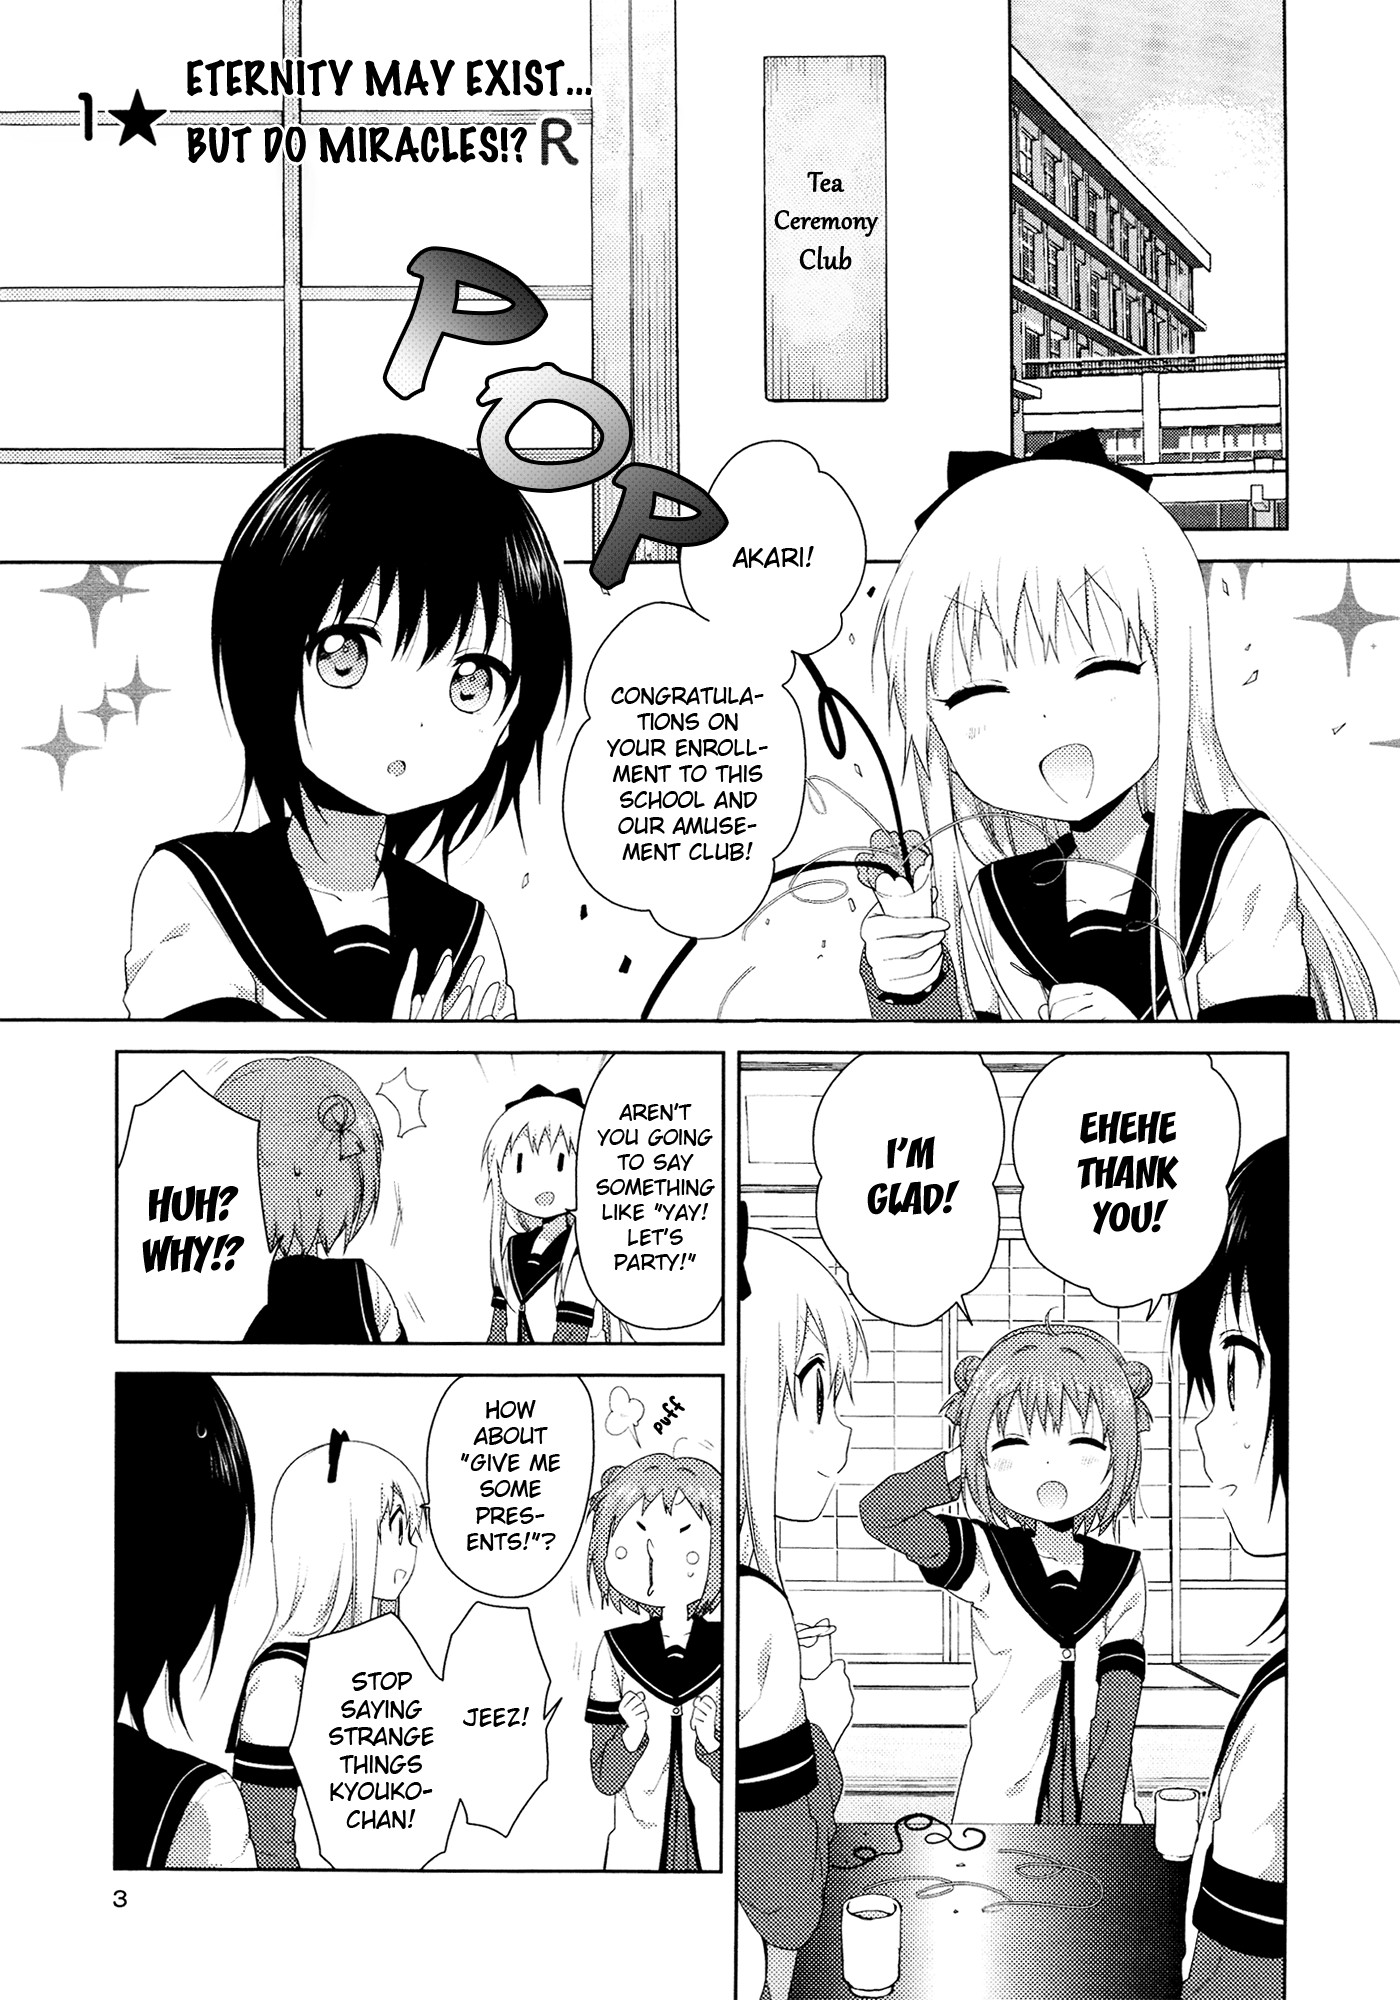 Yuru Yuri Vol.11 Chapter 78.6: Beginnings R1: Eternity May Exist...but Do Miracles!? - Picture 2